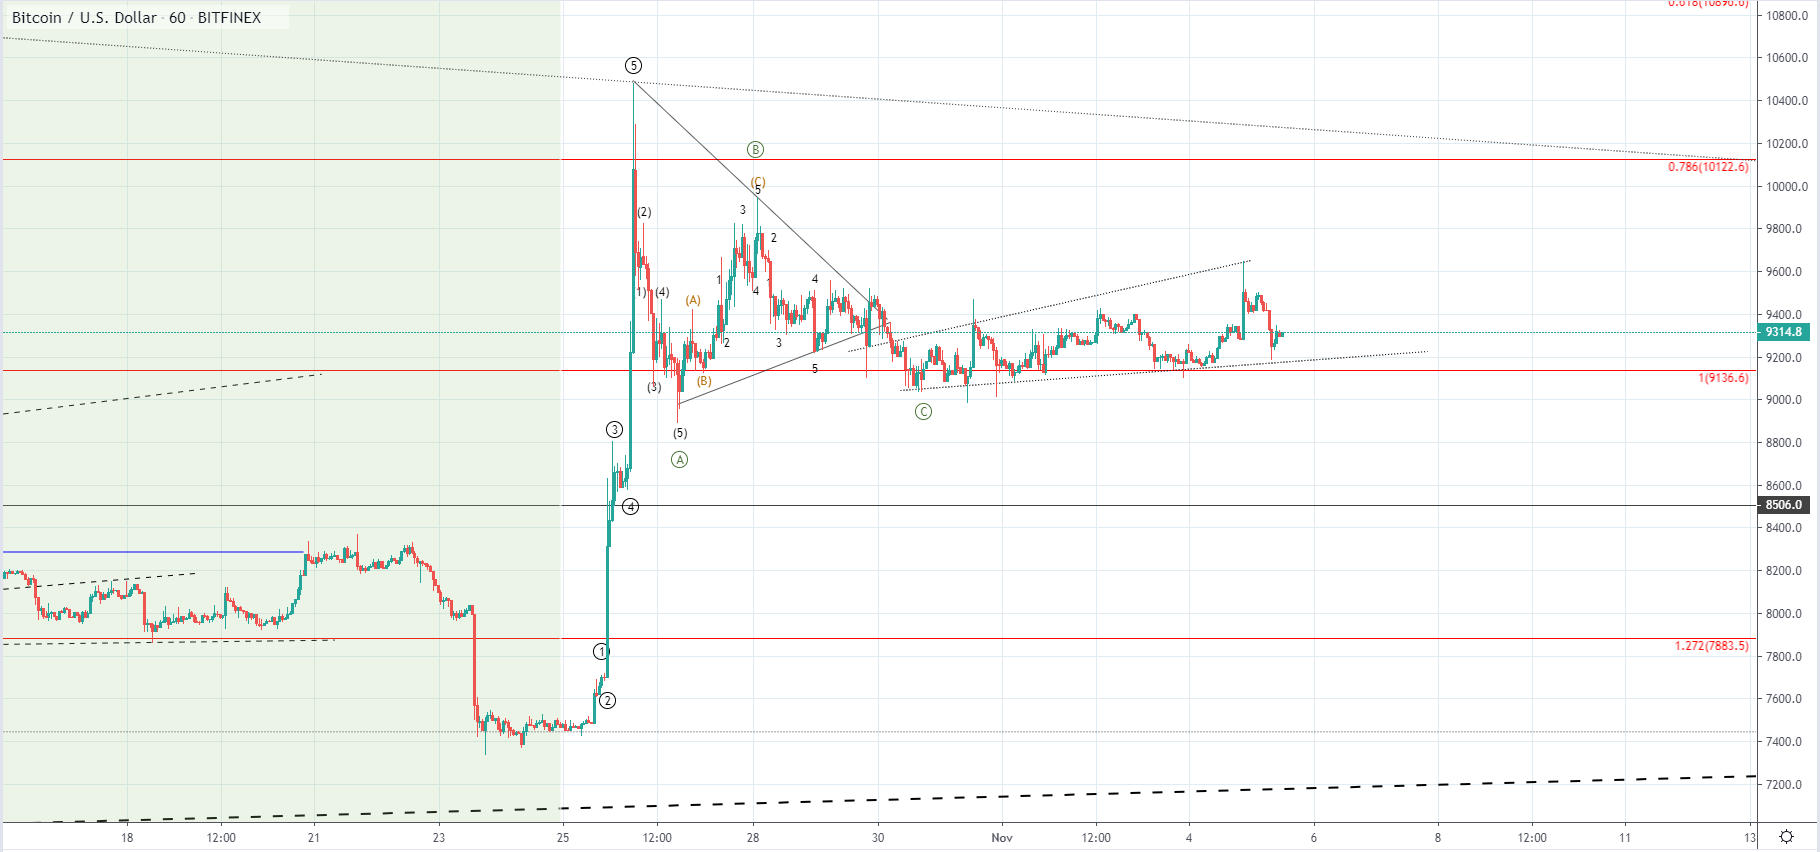 BTC/USD and XRP/USD moving sideways